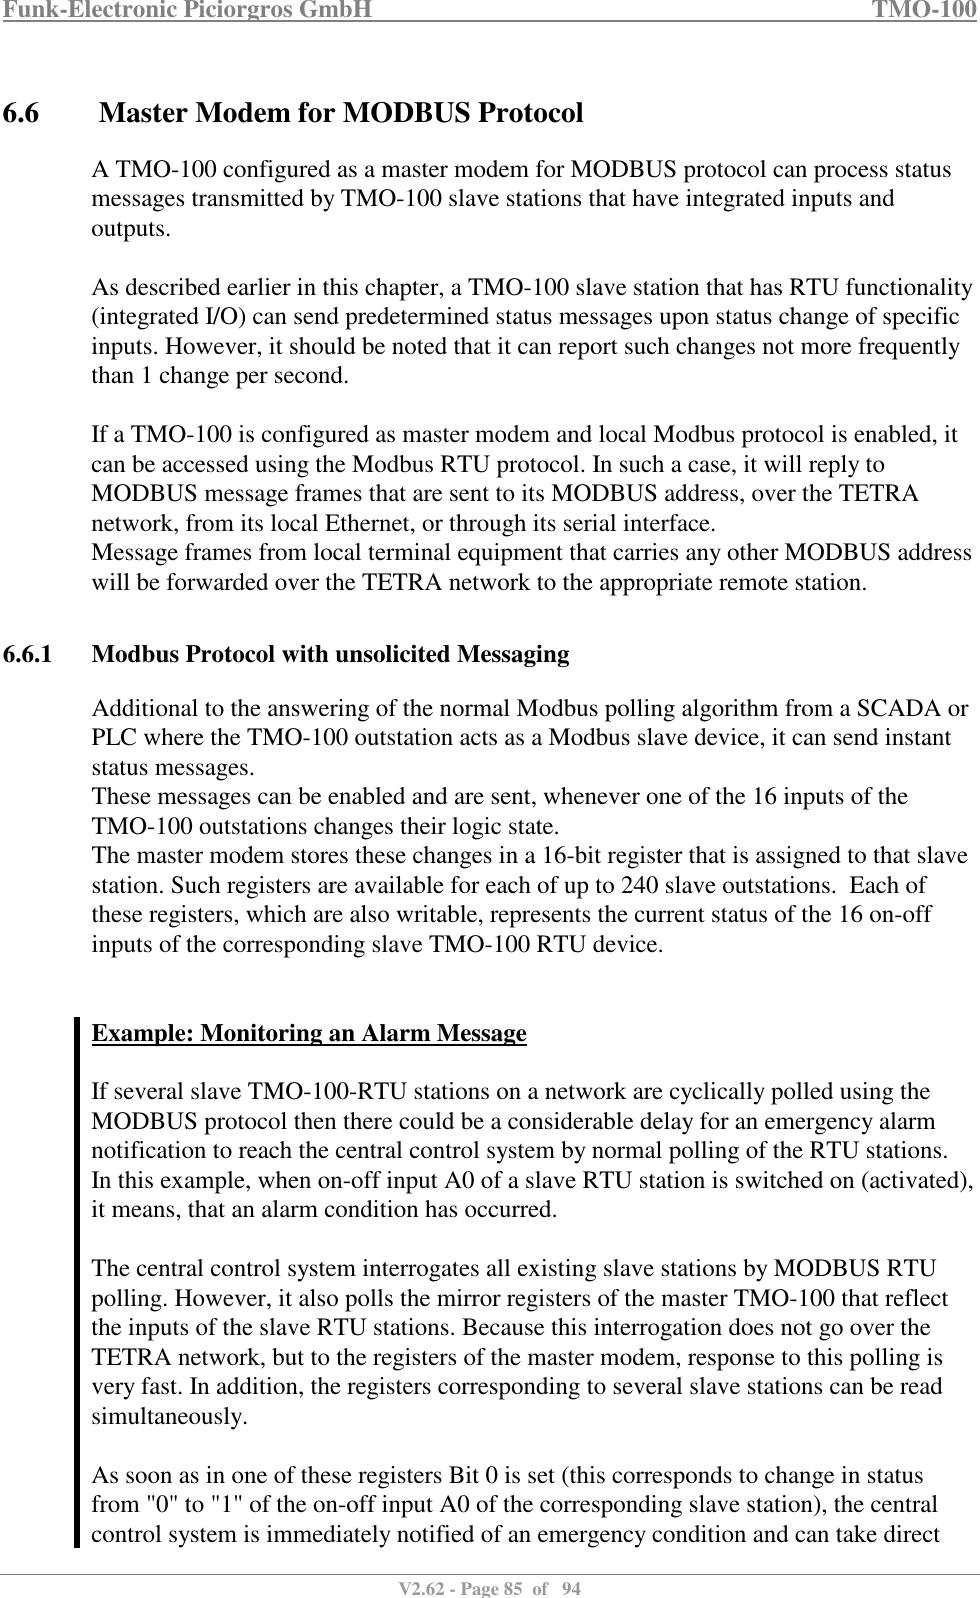 Funk-Electronic Piciorgros GmbH   TMO-100   V2.62 - Page 85  of   94   6.6  Master Modem for MODBUS Protocol A TMO-100 configured as a master modem for MODBUS protocol can process status messages transmitted by TMO-100 slave stations that have integrated inputs and outputs.  As described earlier in this chapter, a TMO-100 slave station that has RTU functionality (integrated I/O) can send predetermined status messages upon status change of specific inputs. However, it should be noted that it can report such changes not more frequently than 1 change per second.   If a TMO-100 is configured as master modem and local Modbus protocol is enabled, it can be accessed using the Modbus RTU protocol. In such a case, it will reply to MODBUS message frames that are sent to its MODBUS address, over the TETRA network, from its local Ethernet, or through its serial interface.  Message frames from local terminal equipment that carries any other MODBUS address will be forwarded over the TETRA network to the appropriate remote station.   6.6.1 Modbus Protocol with unsolicited Messaging Additional to the answering of the normal Modbus polling algorithm from a SCADA or PLC where the TMO-100 outstation acts as a Modbus slave device, it can send instant status messages. These messages can be enabled and are sent, whenever one of the 16 inputs of the TMO-100 outstations changes their logic state. The master modem stores these changes in a 16-bit register that is assigned to that slave station. Such registers are available for each of up to 240 slave outstations.  Each of these registers, which are also writable, represents the current status of the 16 on-off inputs of the corresponding slave TMO-100 RTU device.   Example: Monitoring an Alarm Message  If several slave TMO-100-RTU stations on a network are cyclically polled using the MODBUS protocol then there could be a considerable delay for an emergency alarm notification to reach the central control system by normal polling of the RTU stations.  In this example, when on-off input A0 of a slave RTU station is switched on (activated), it means, that an alarm condition has occurred.   The central control system interrogates all existing slave stations by MODBUS RTU polling. However, it also polls the mirror registers of the master TMO-100 that reflect the inputs of the slave RTU stations. Because this interrogation does not go over the TETRA network, but to the registers of the master modem, response to this polling is very fast. In addition, the registers corresponding to several slave stations can be read simultaneously.   As soon as in one of these registers Bit 0 is set (this corresponds to change in status from &quot;0&quot; to &quot;1&quot; of the on-off input A0 of the corresponding slave station), the central control system is immediately notified of an emergency condition and can take direct 